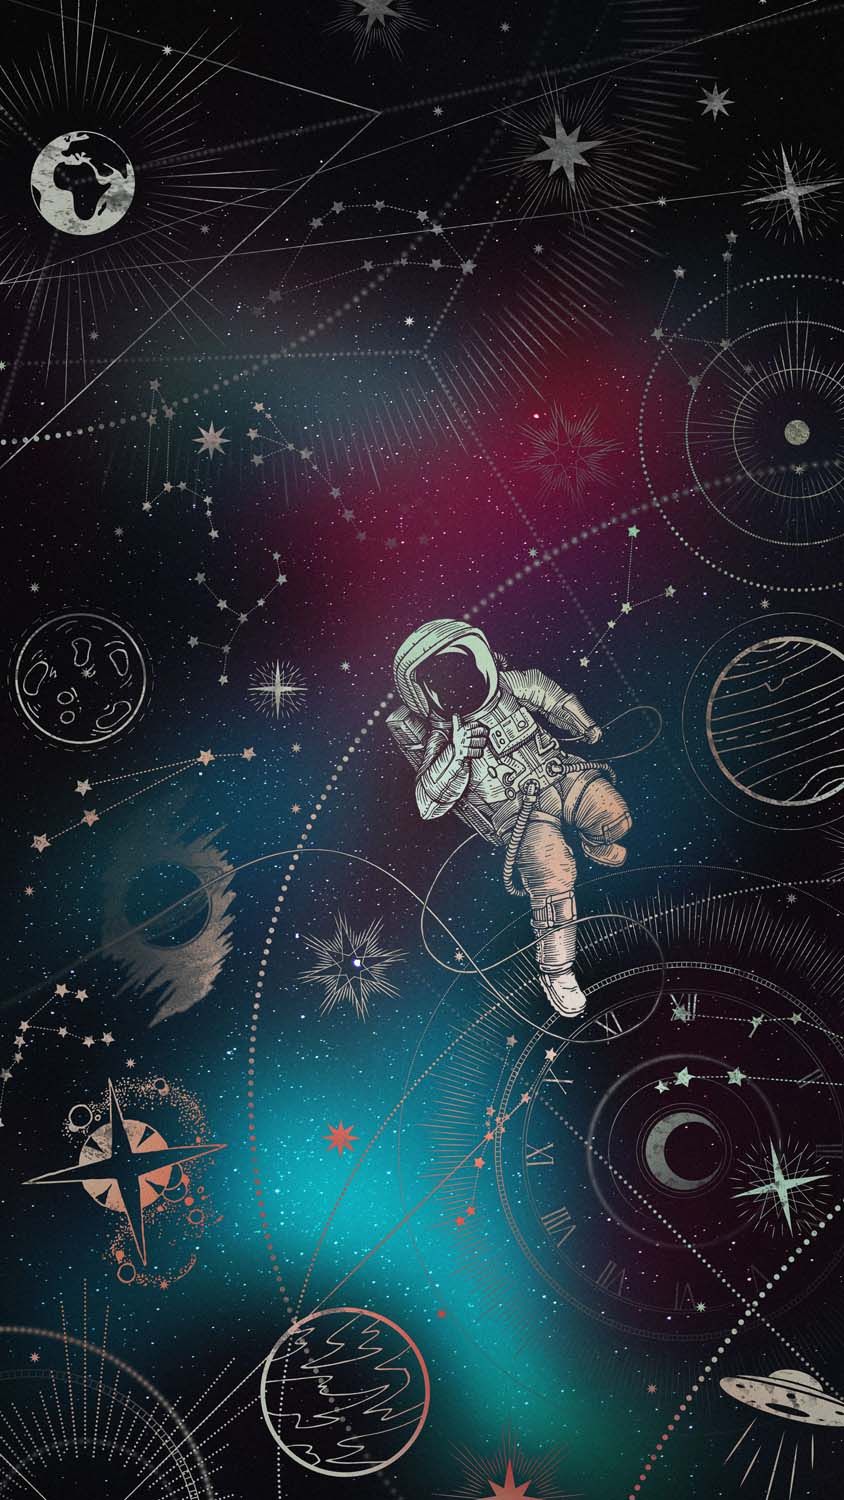 An astronaut in space with stars and planets - Space